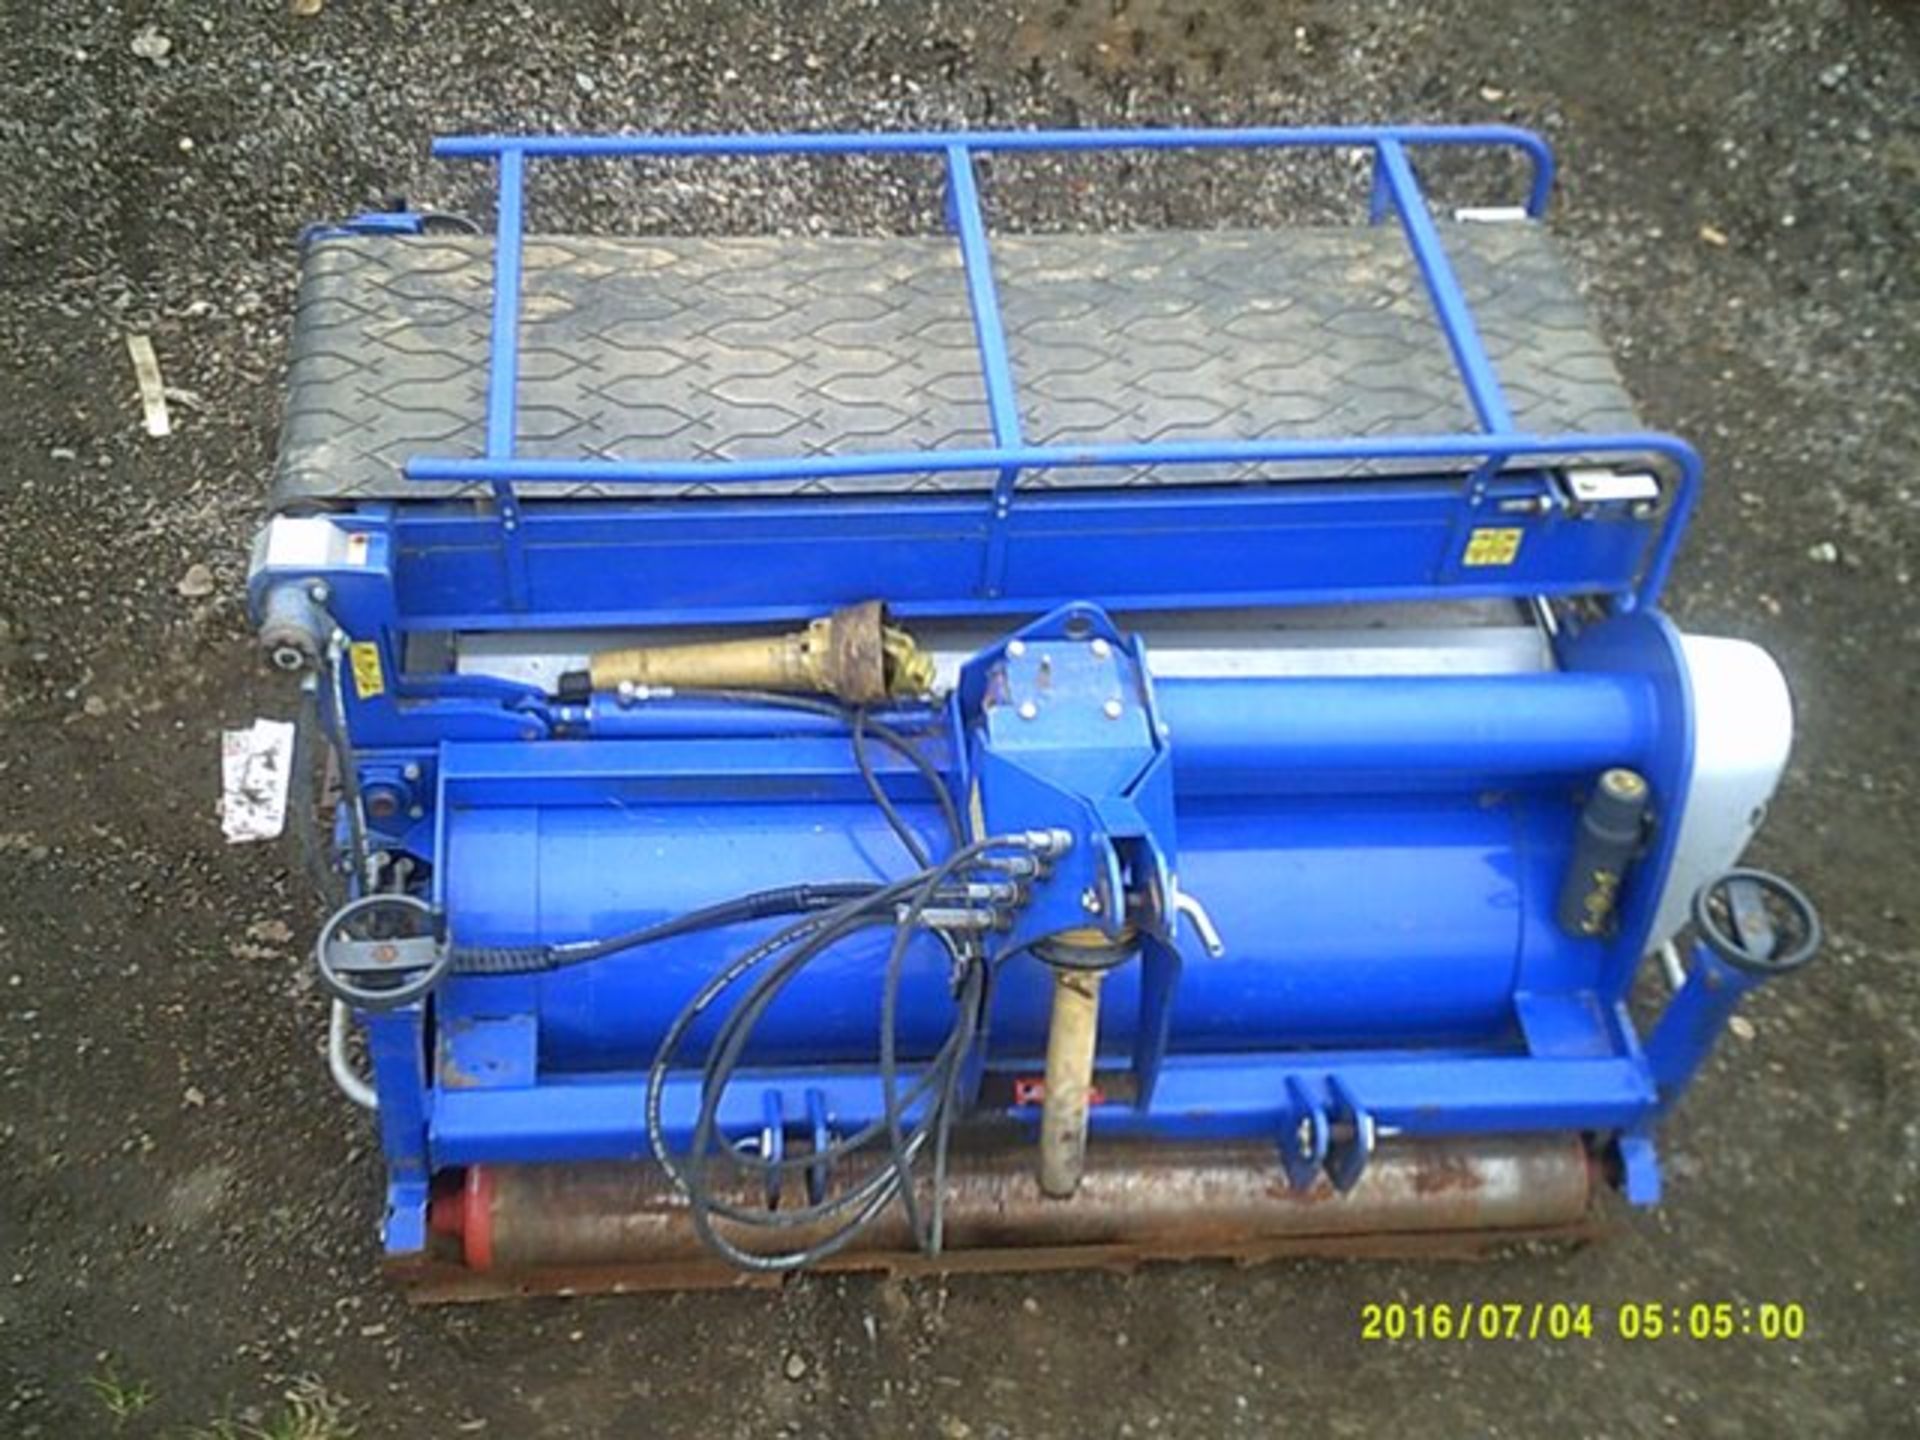 Koro FTM 2000 field top maker fitted with terra plane rotor Serial no. 22135, year 2013 - Image 7 of 7